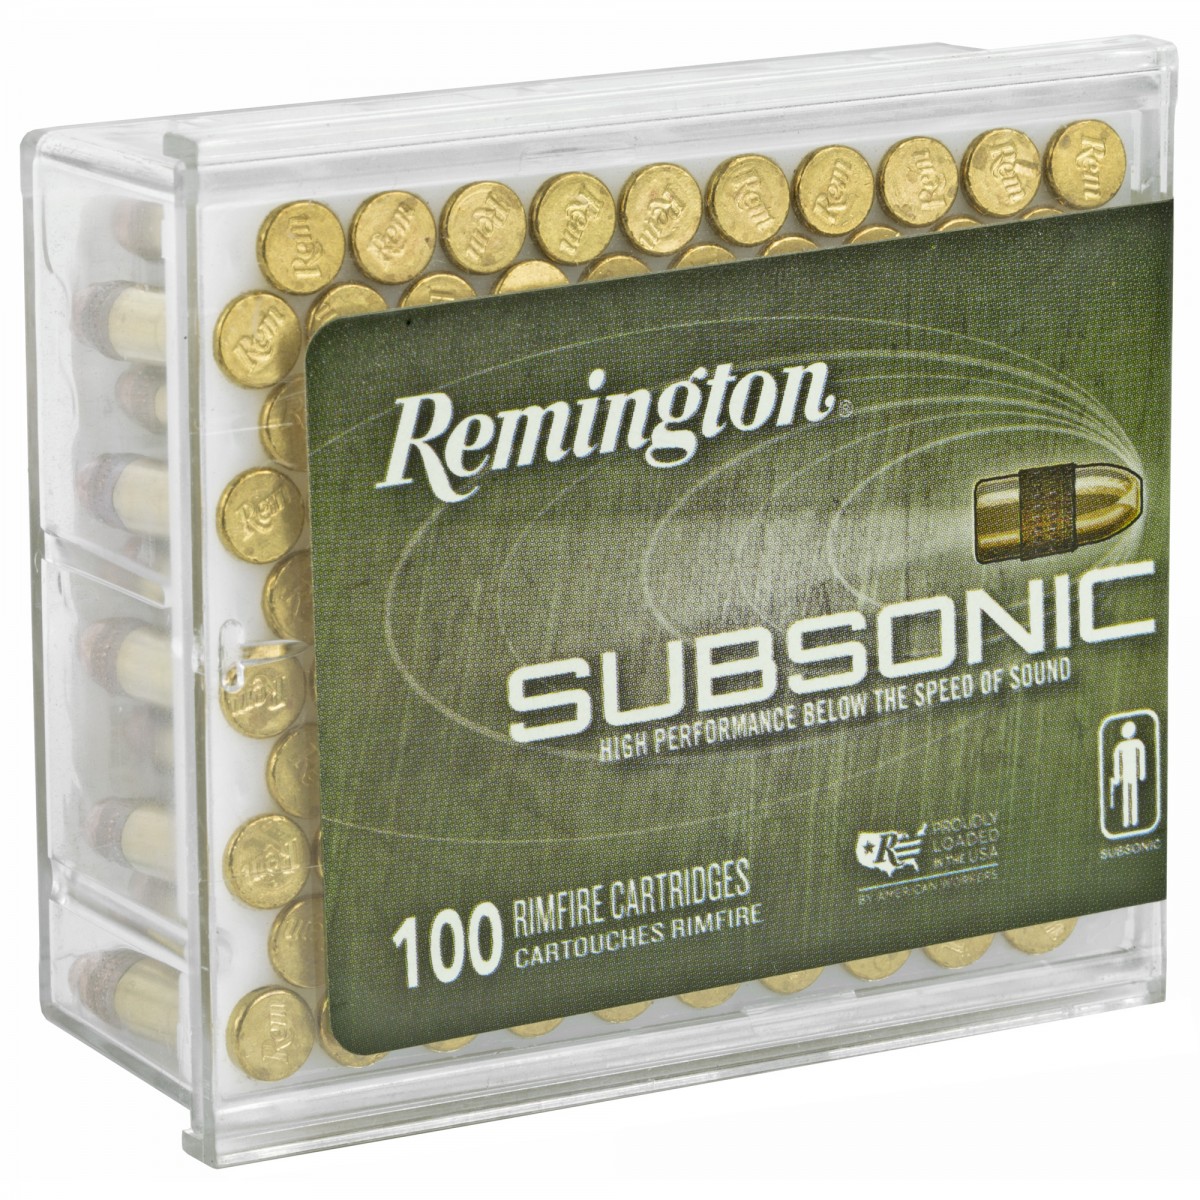 Remington Subsonic .22 LR Ammo 40gr Copper-Plated Hollow-Point 100 Rounds